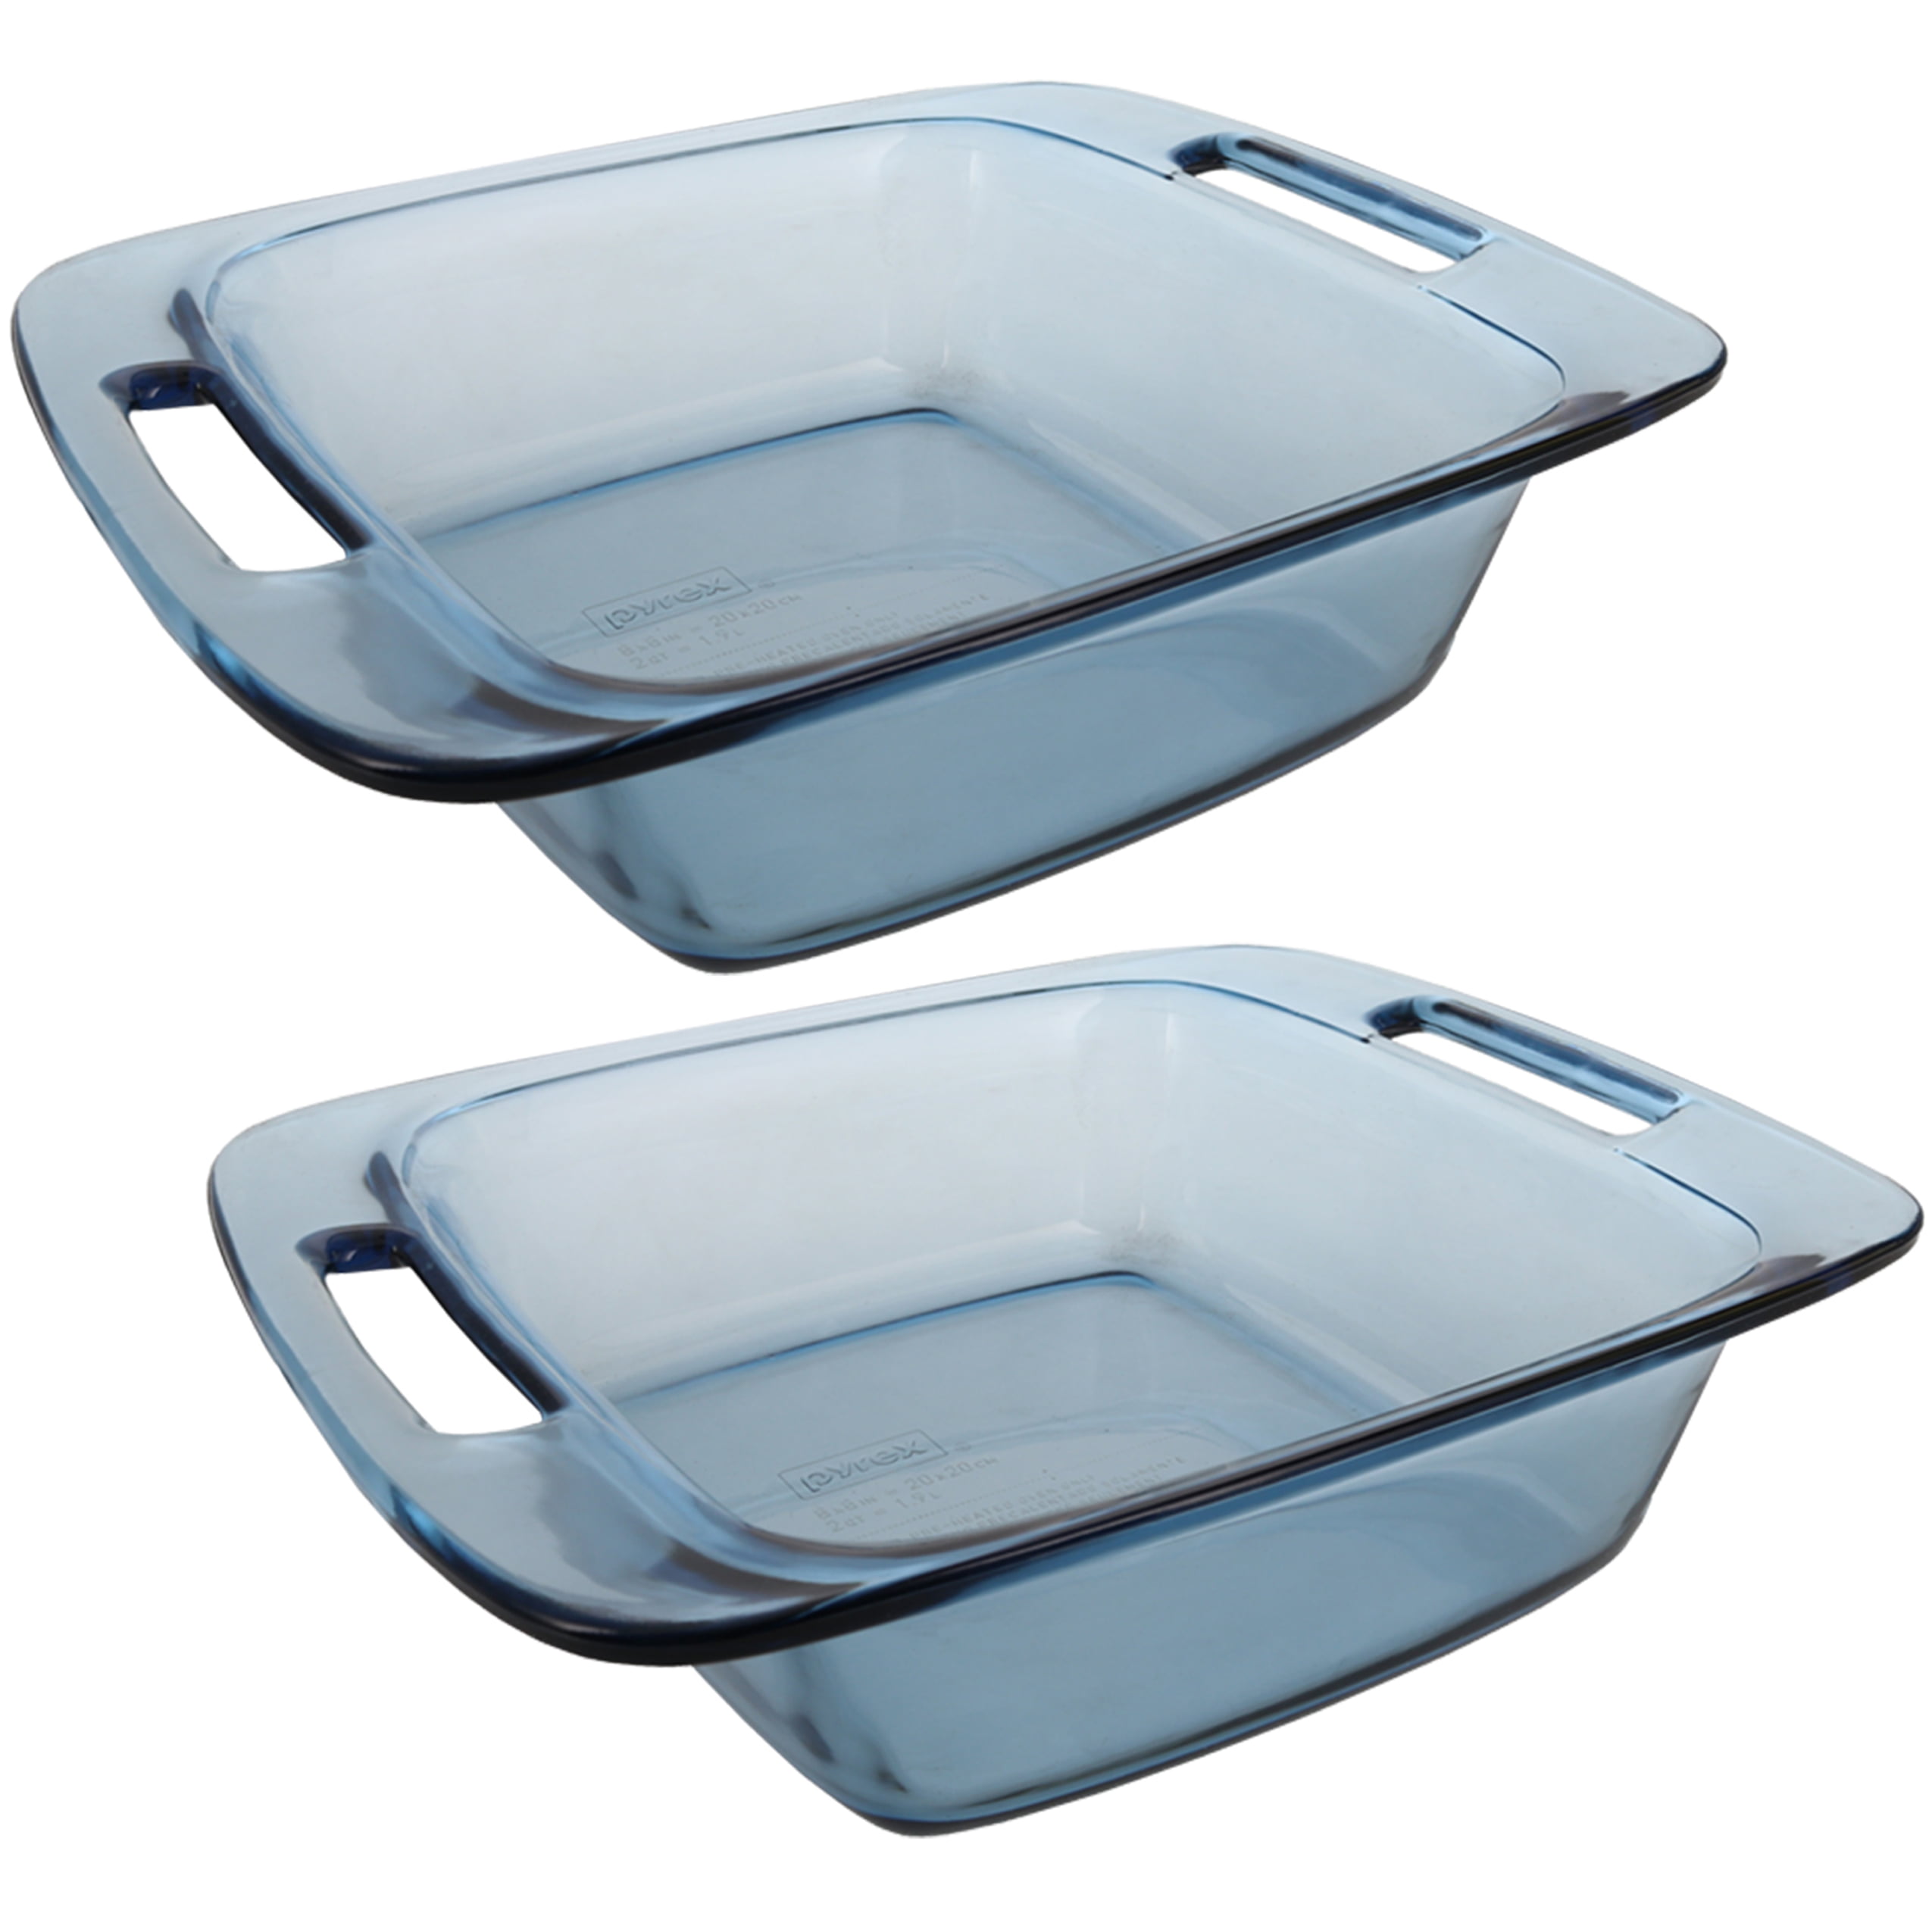 Pyrex C222 Blue Tint Clear 8x8 Square Glass 2 Qt Baking Dish With Handles  USA for sale online